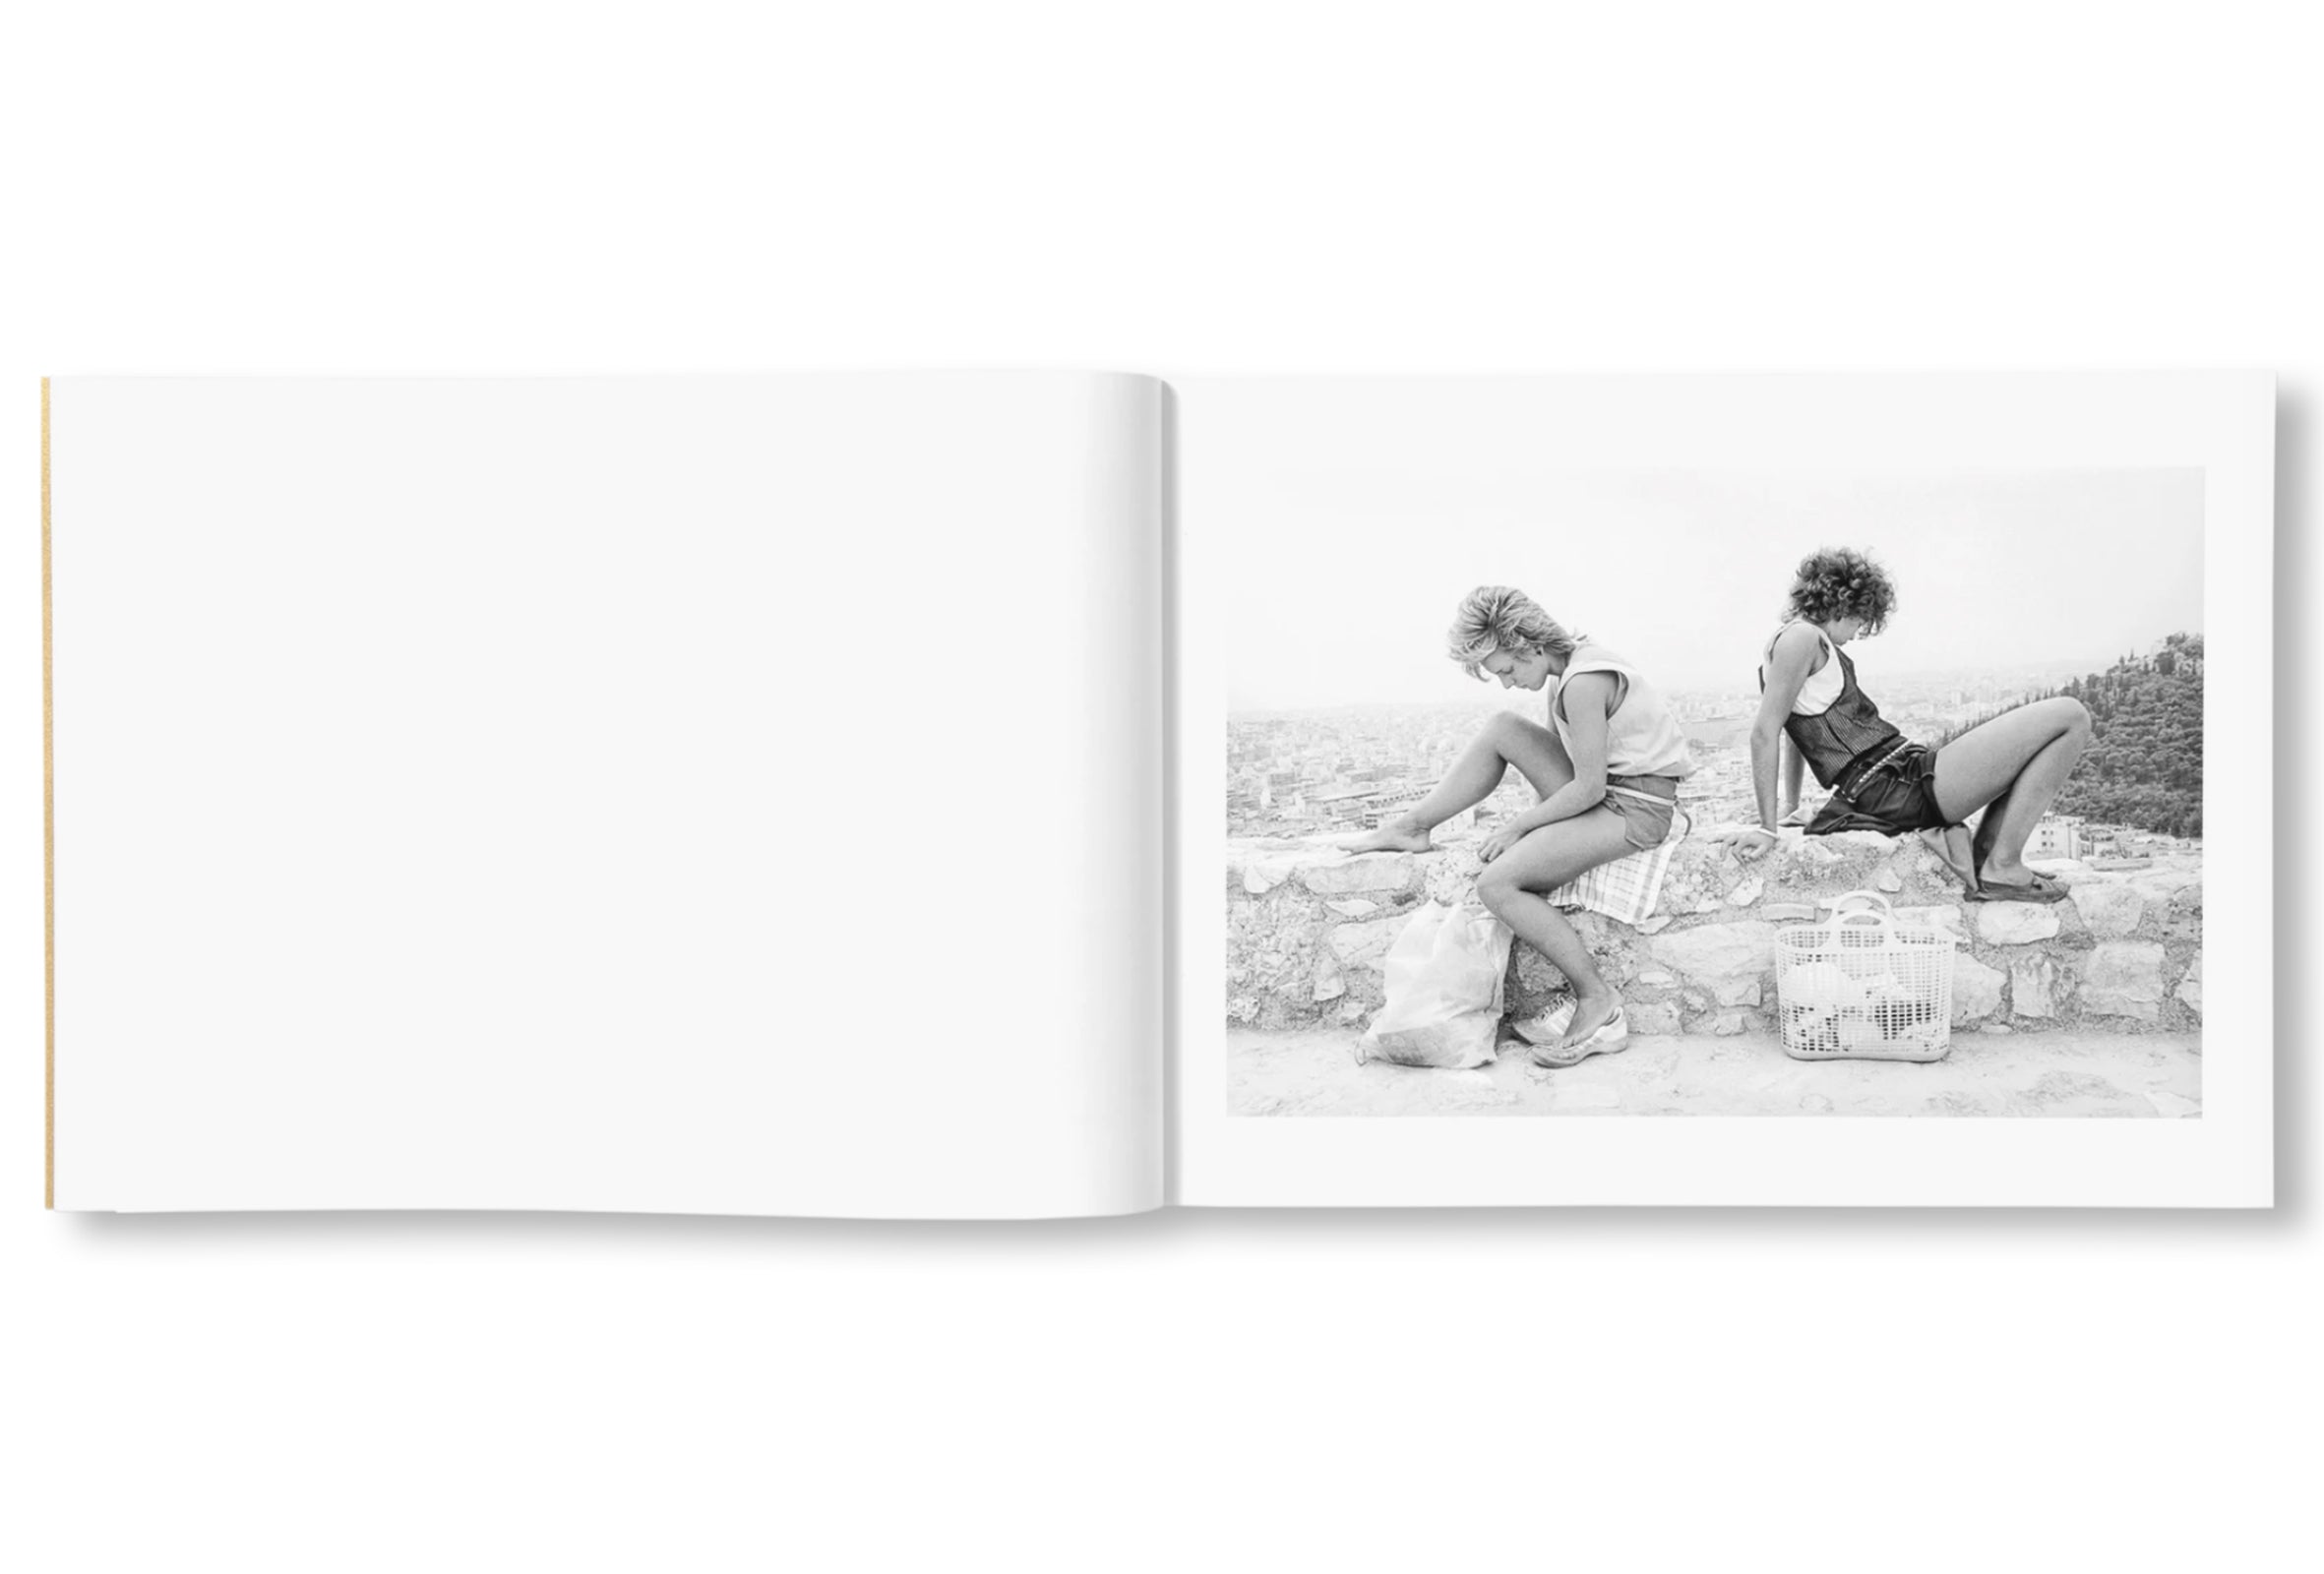 ON THE ACROPOLIS by Tod Papageorge [SIGNED]